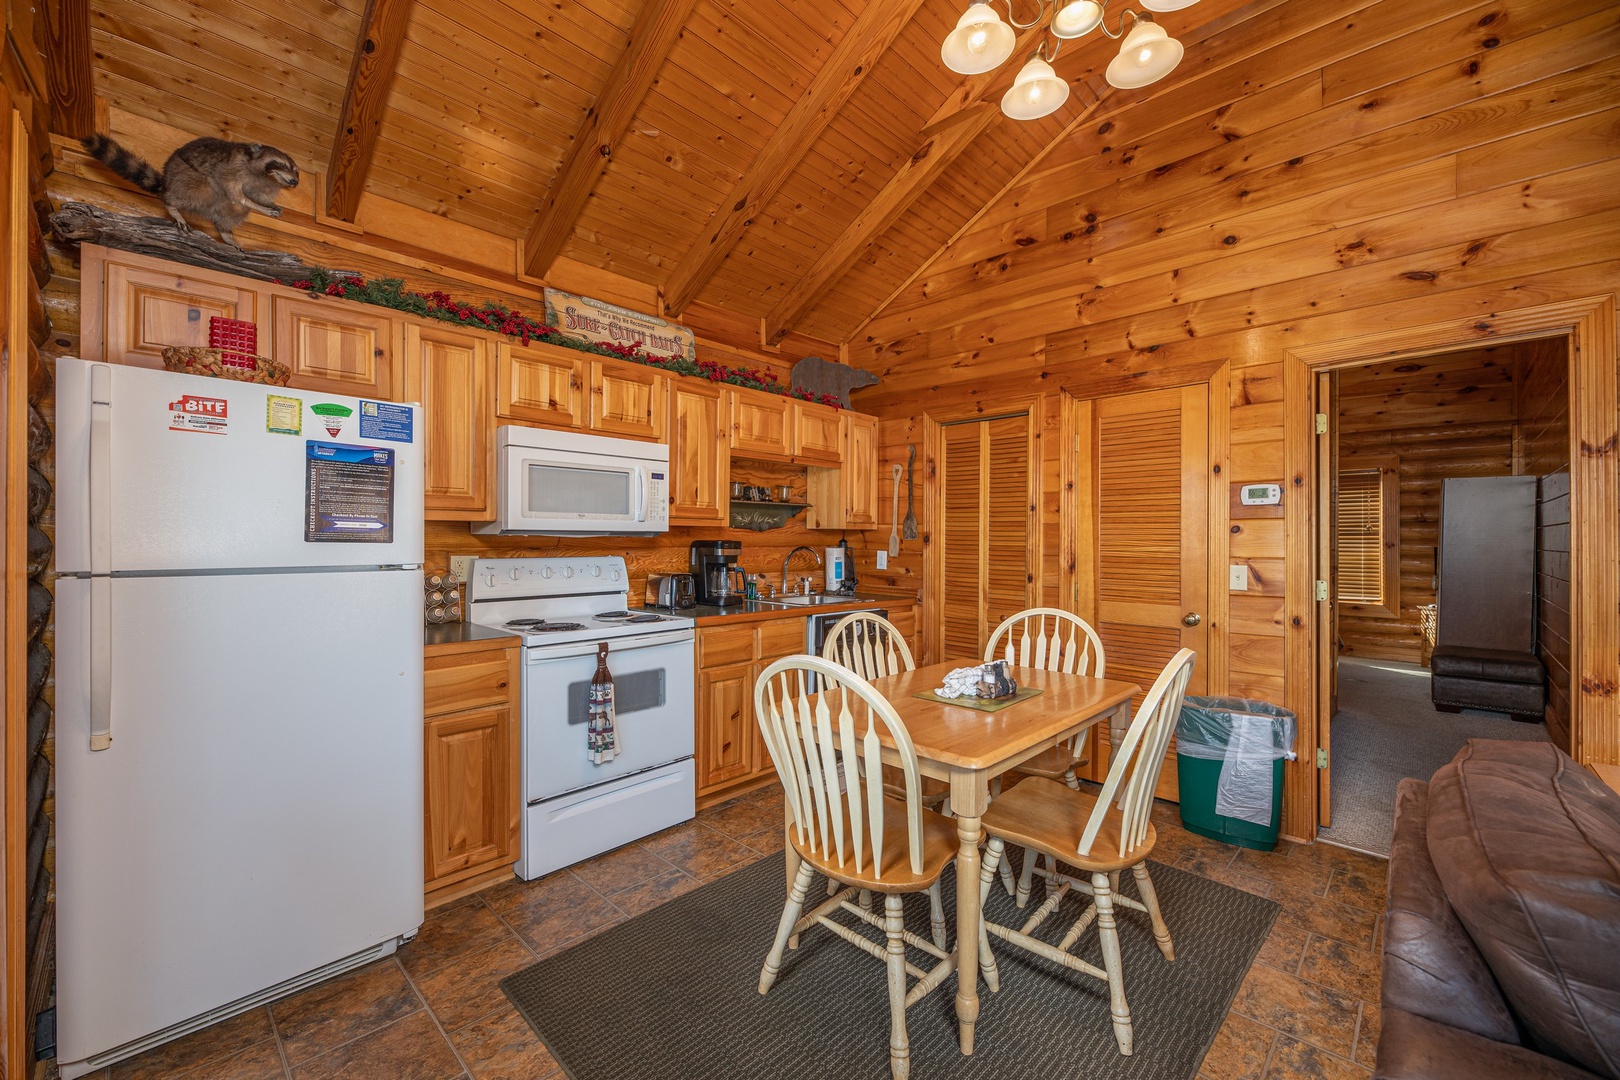 Kitchen with white appliances and dining space for 4 at Gone Fishin', a 2-bedroom cabin rental located in Pigeon Forge